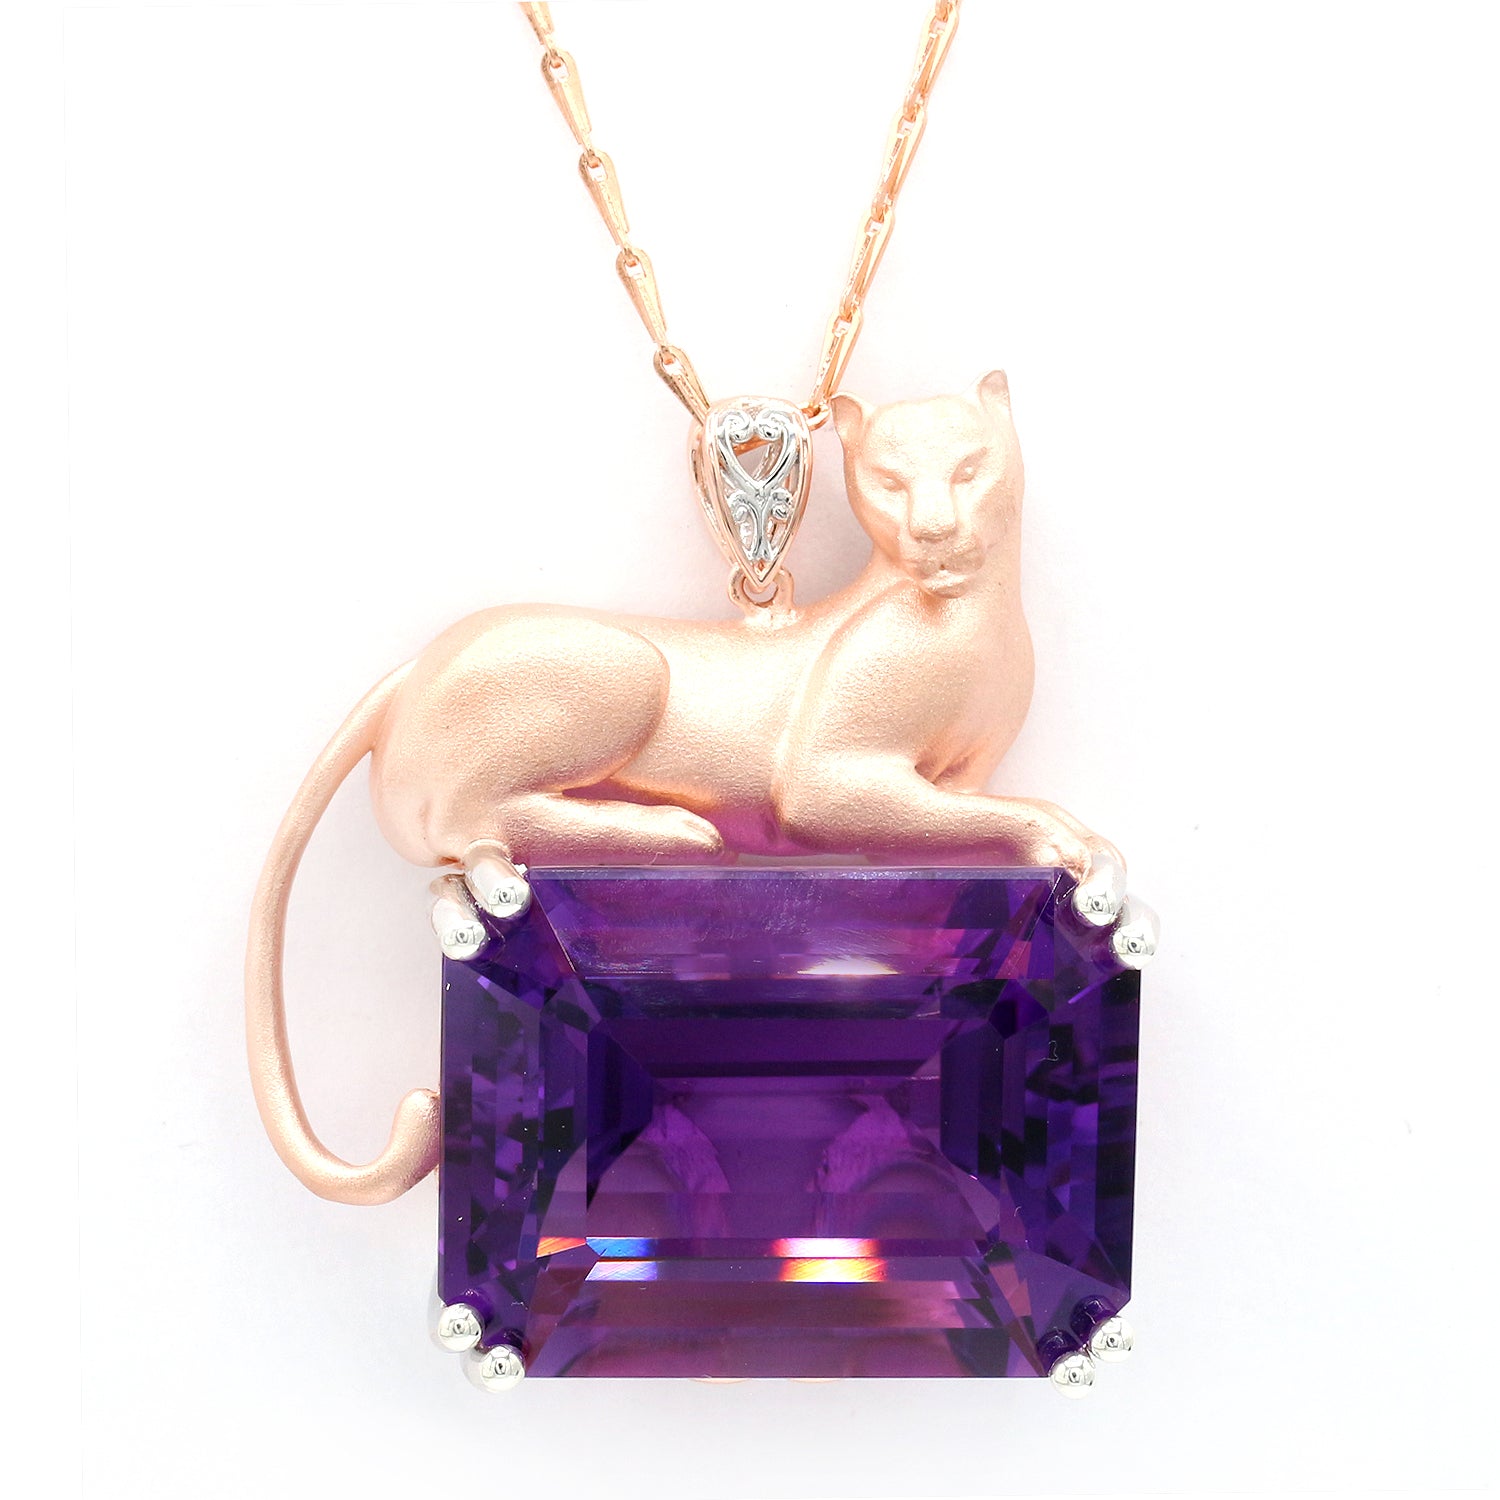 Limited Edition Gems en Vogue One-of-a-kind 62.36ctw Namibian Amethyst Panther Honker Pendant